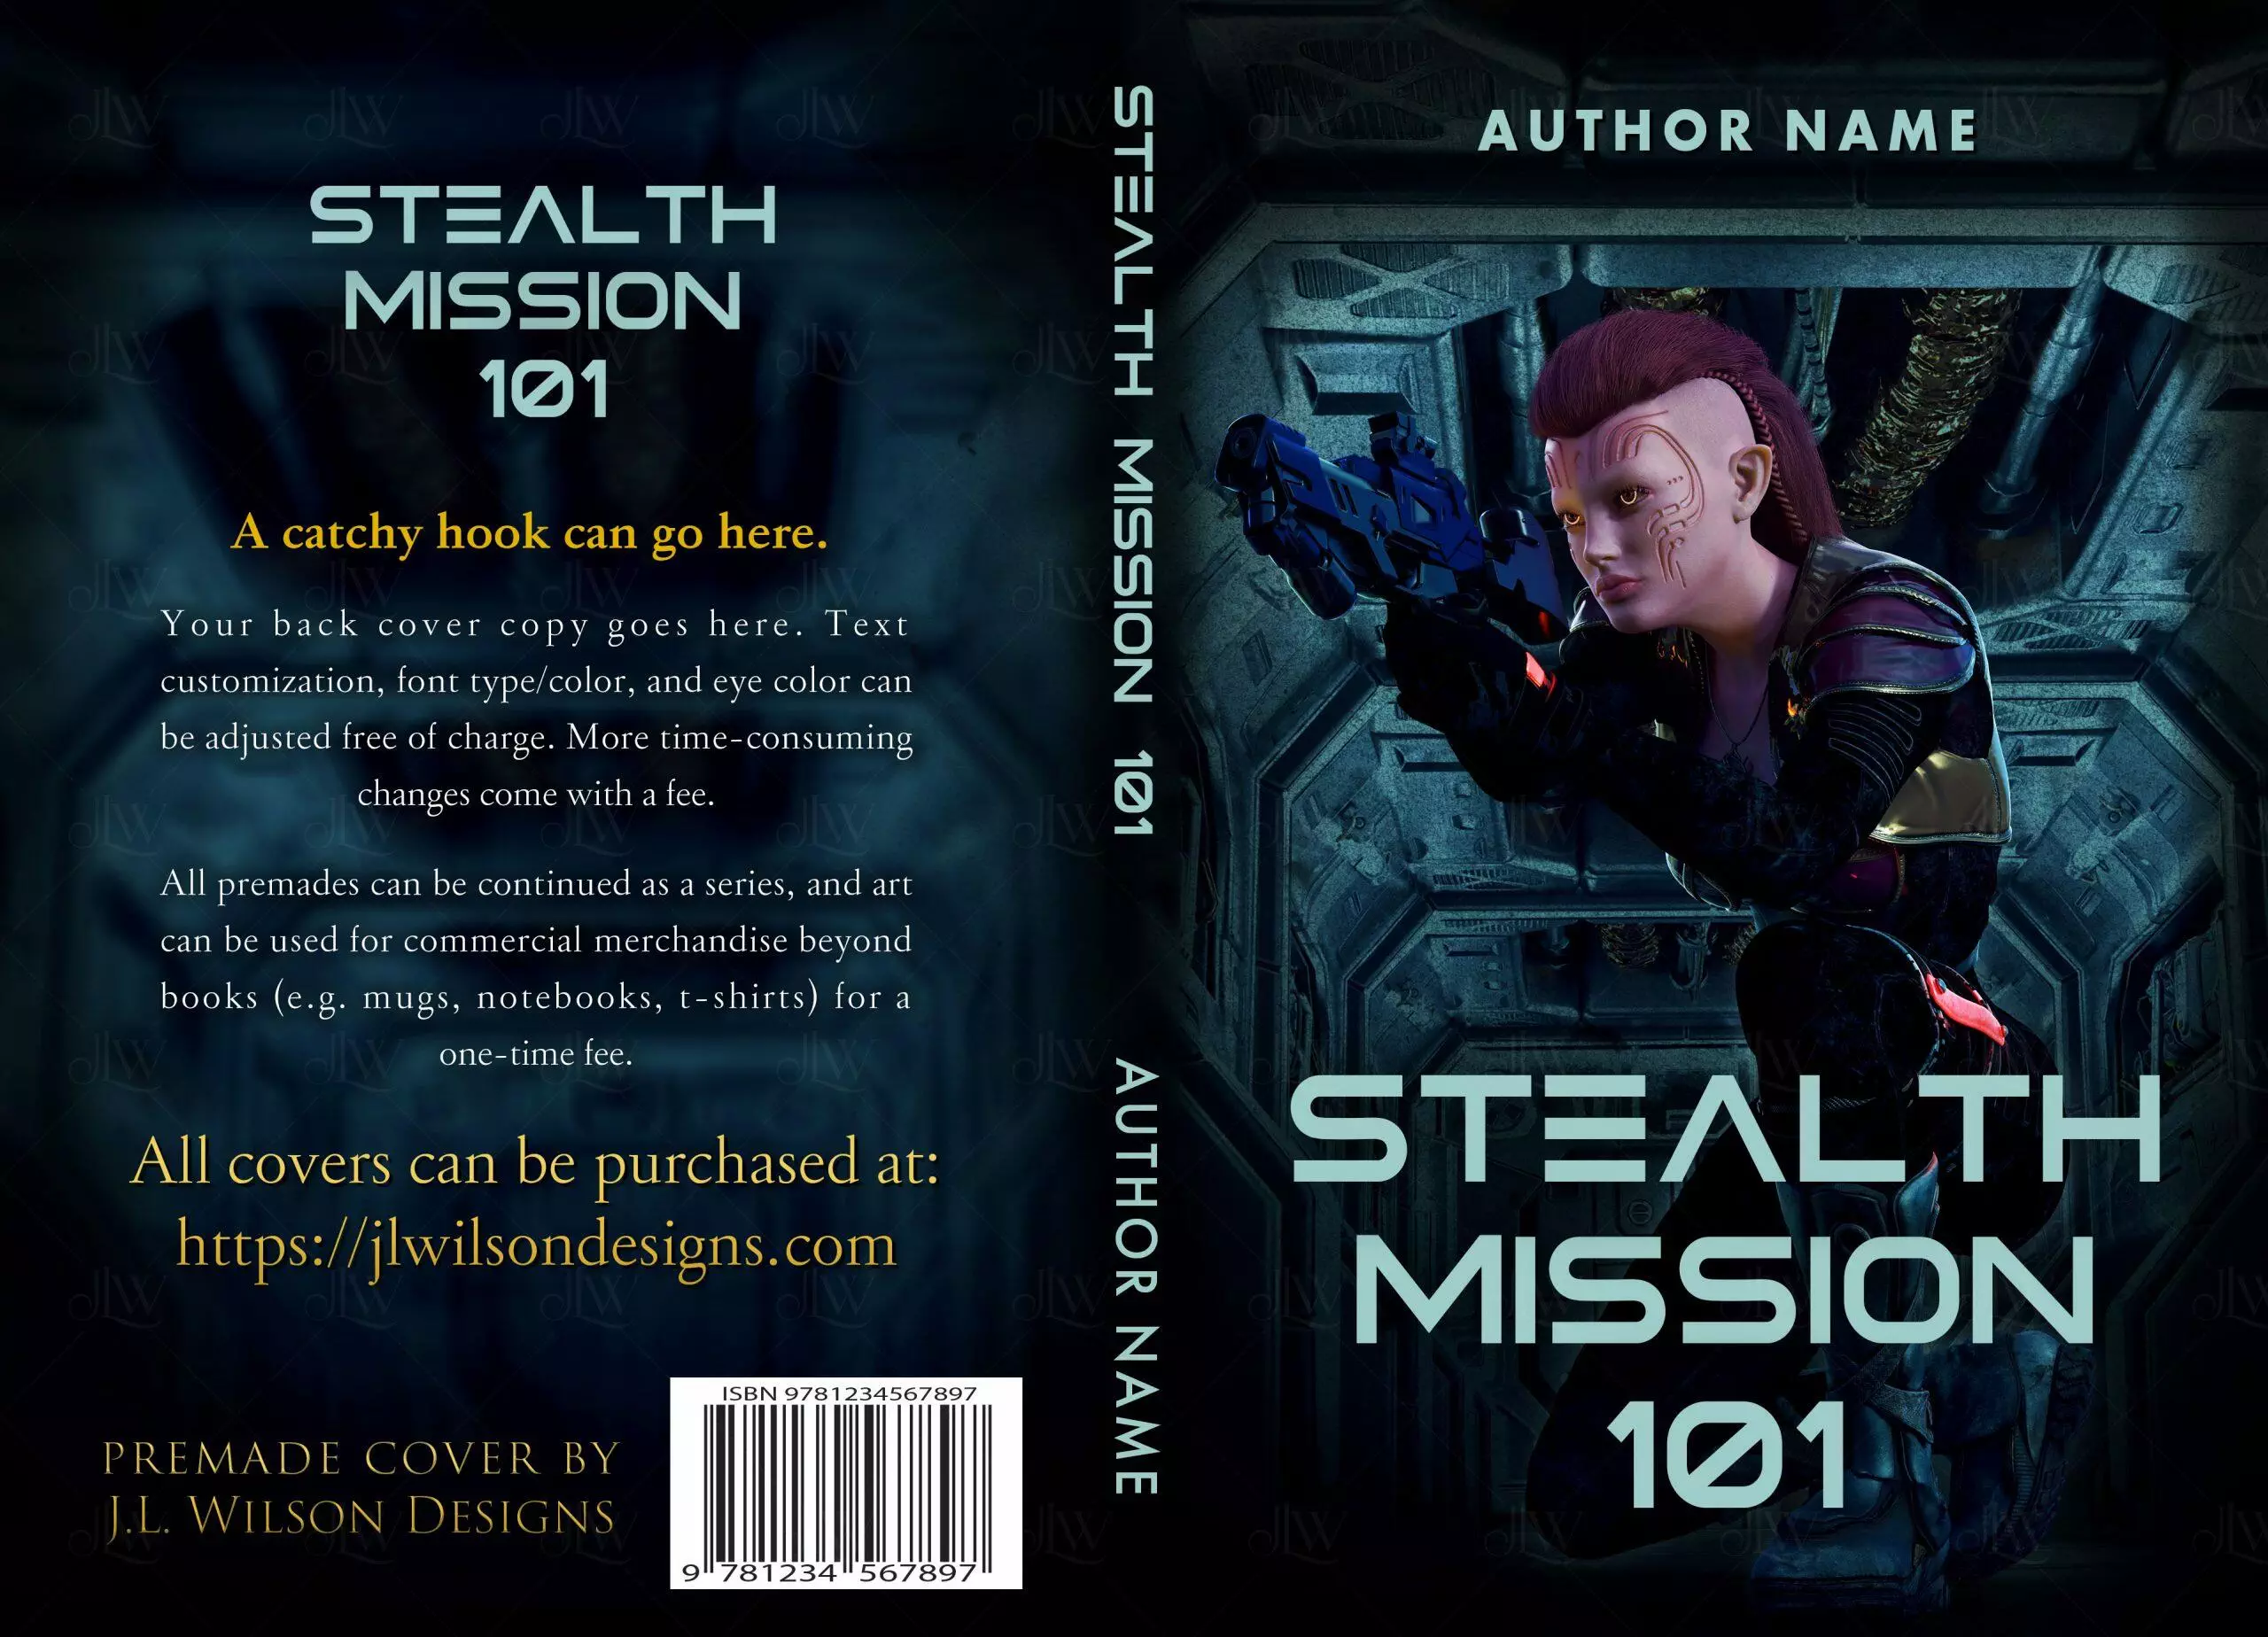 A science fiction book cover with a tough alien woman holding a gun on a futuristic spaceship